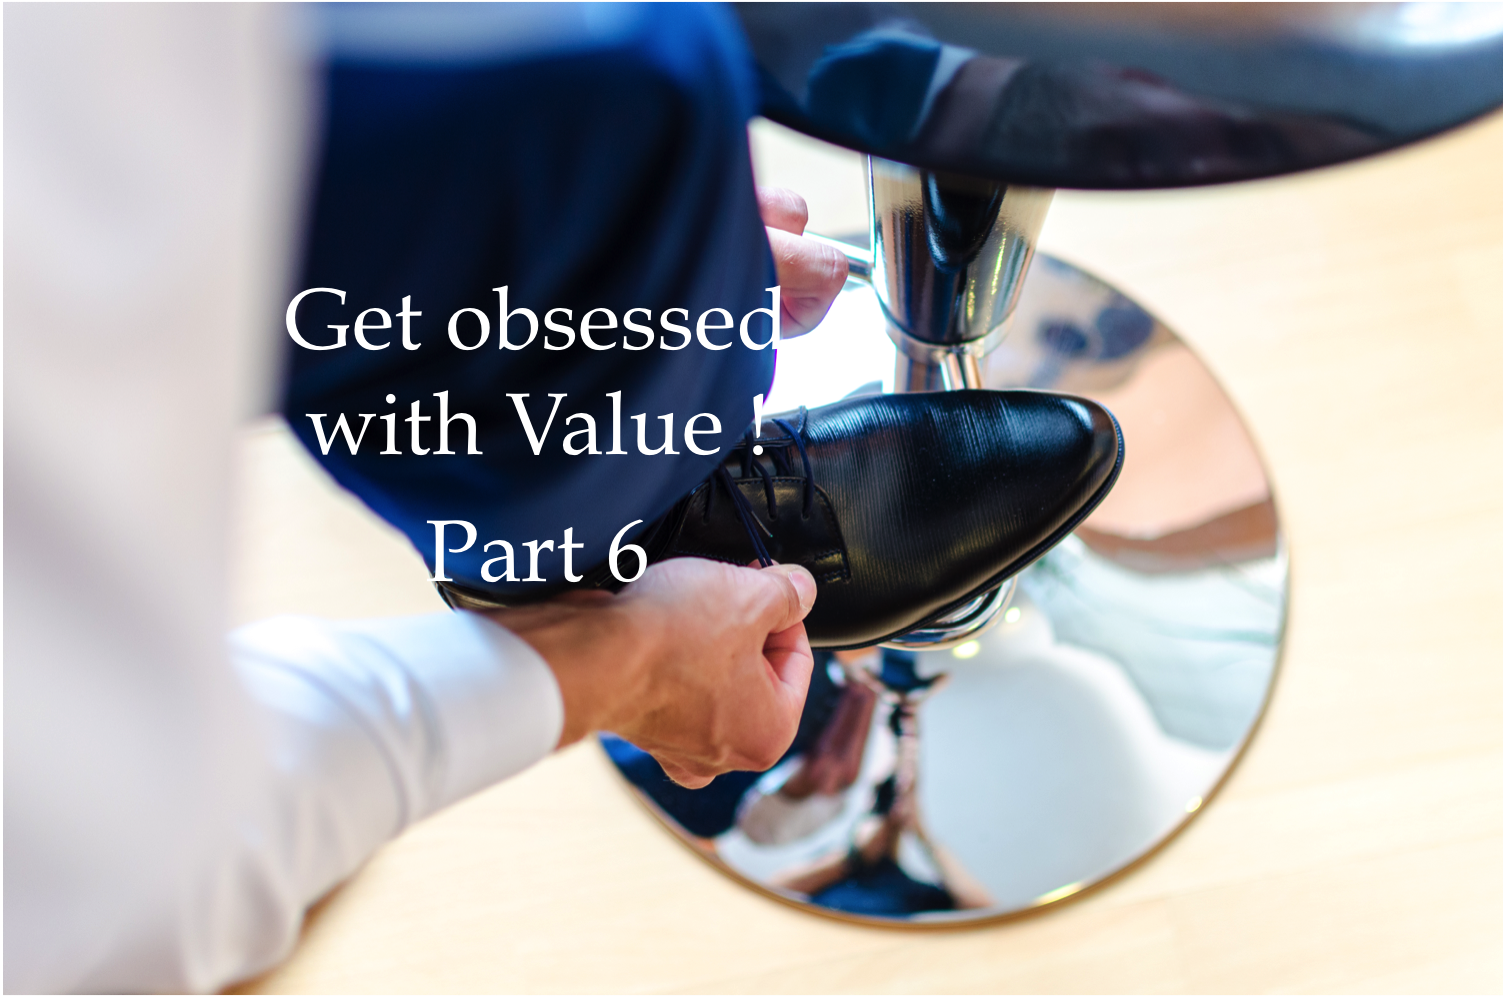 Value is THE world's leader - Part 6